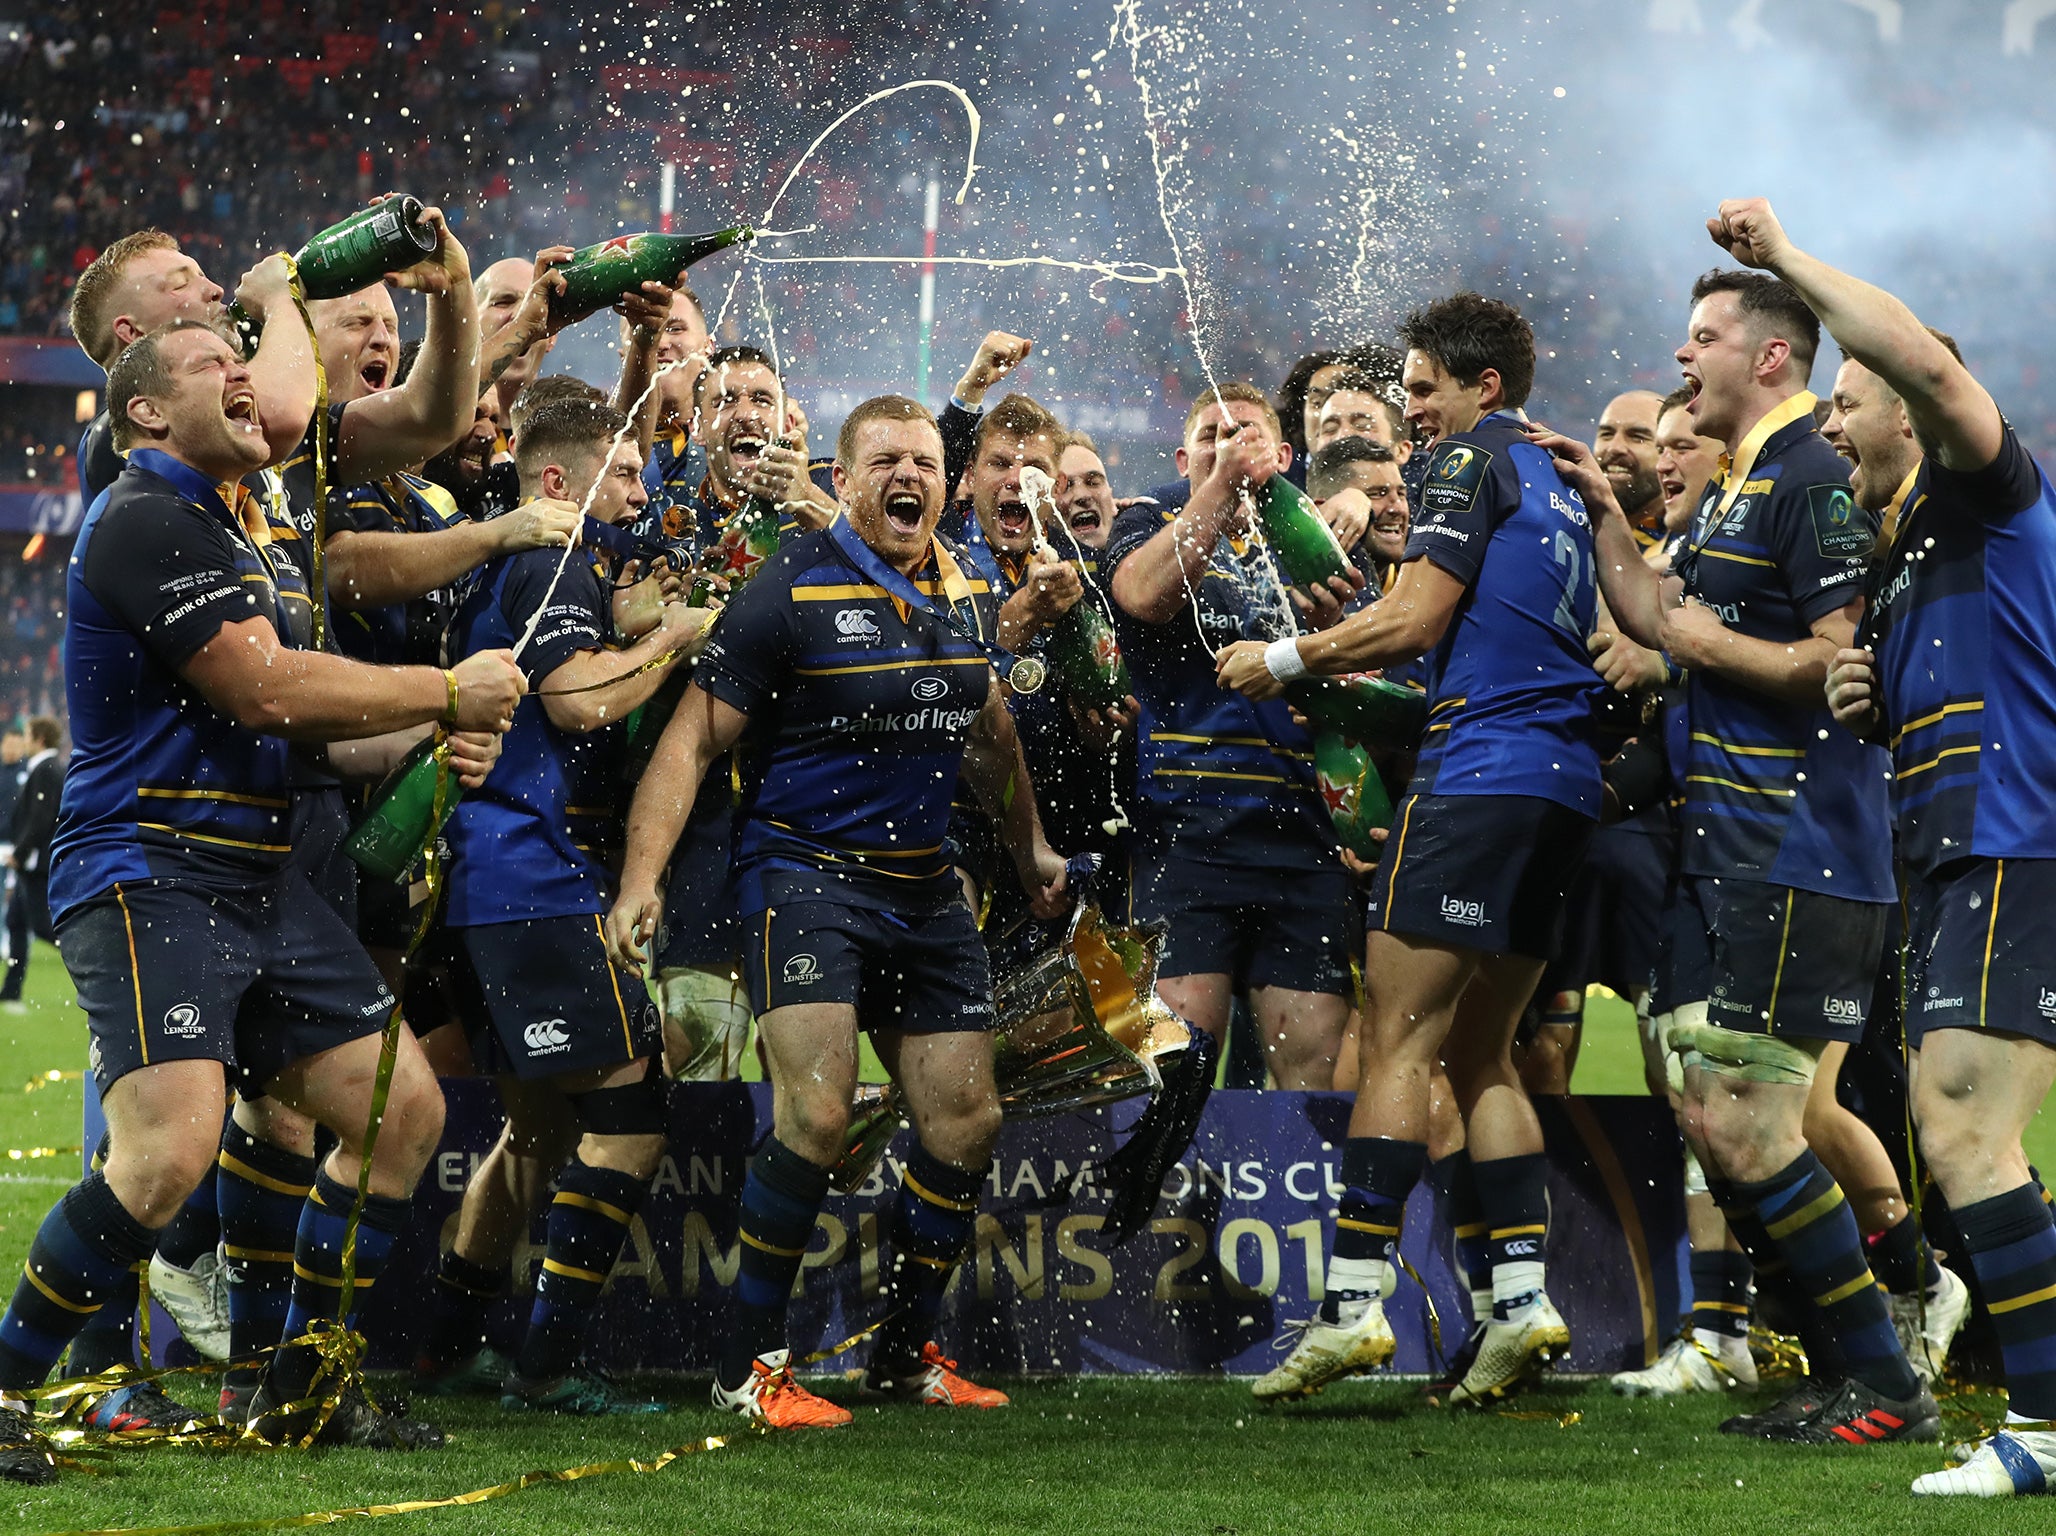 Leinster will face Wasps and Bath as part of their Champions Cup defence